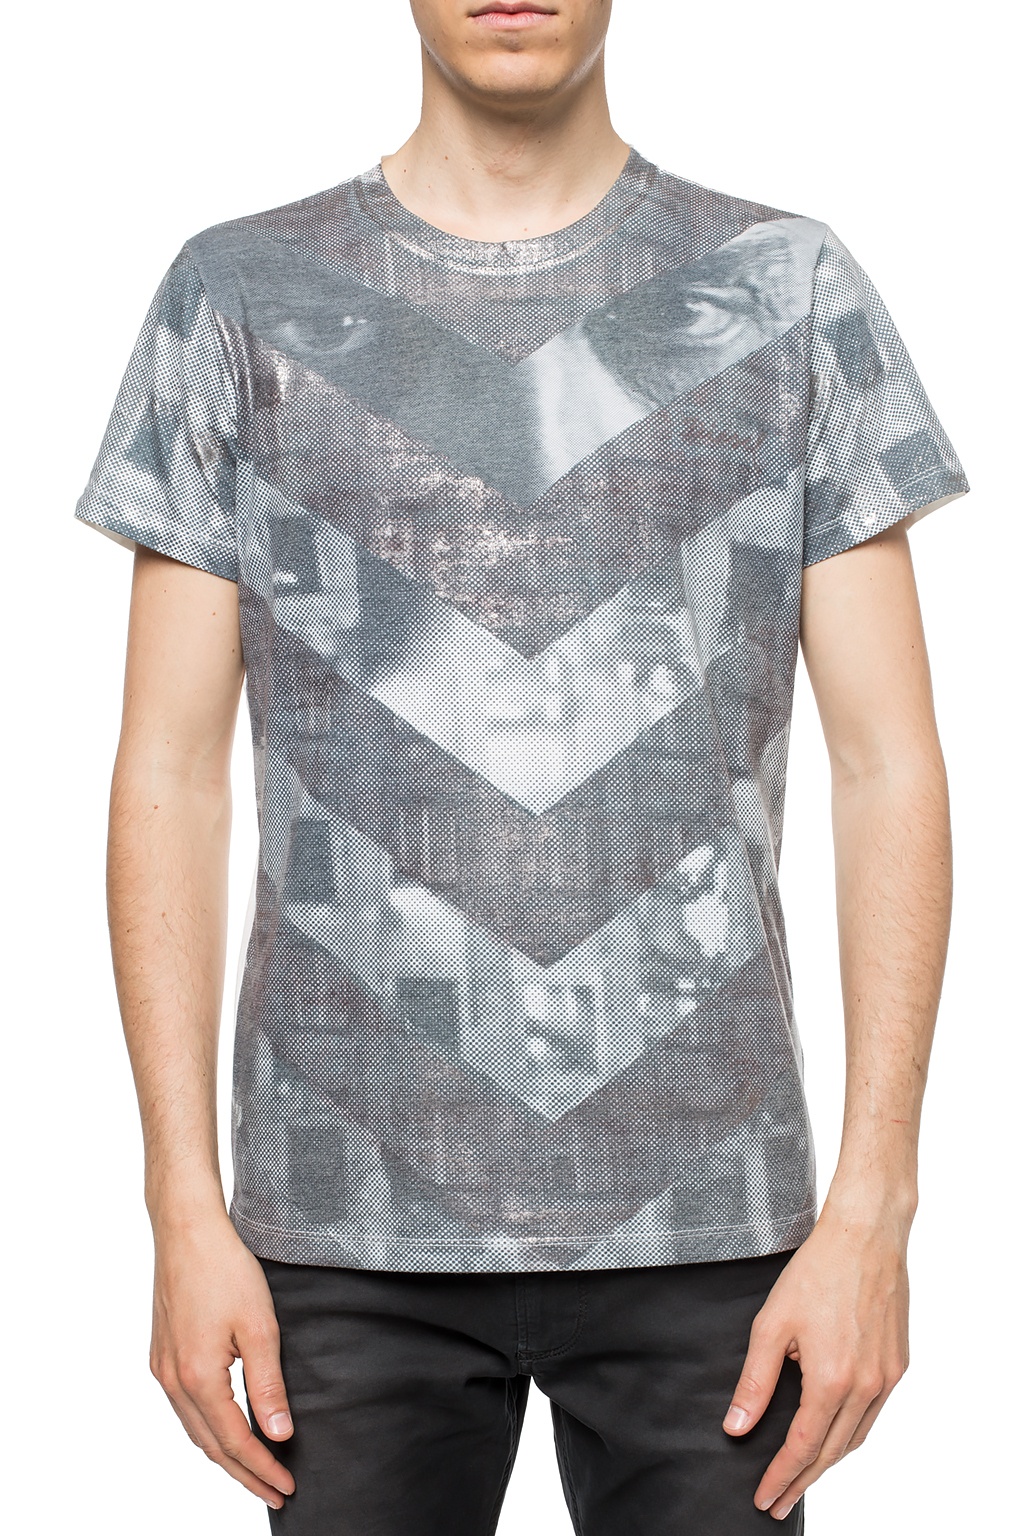 Diesel T-shirt Exclusively Designed for SneakersbeShops